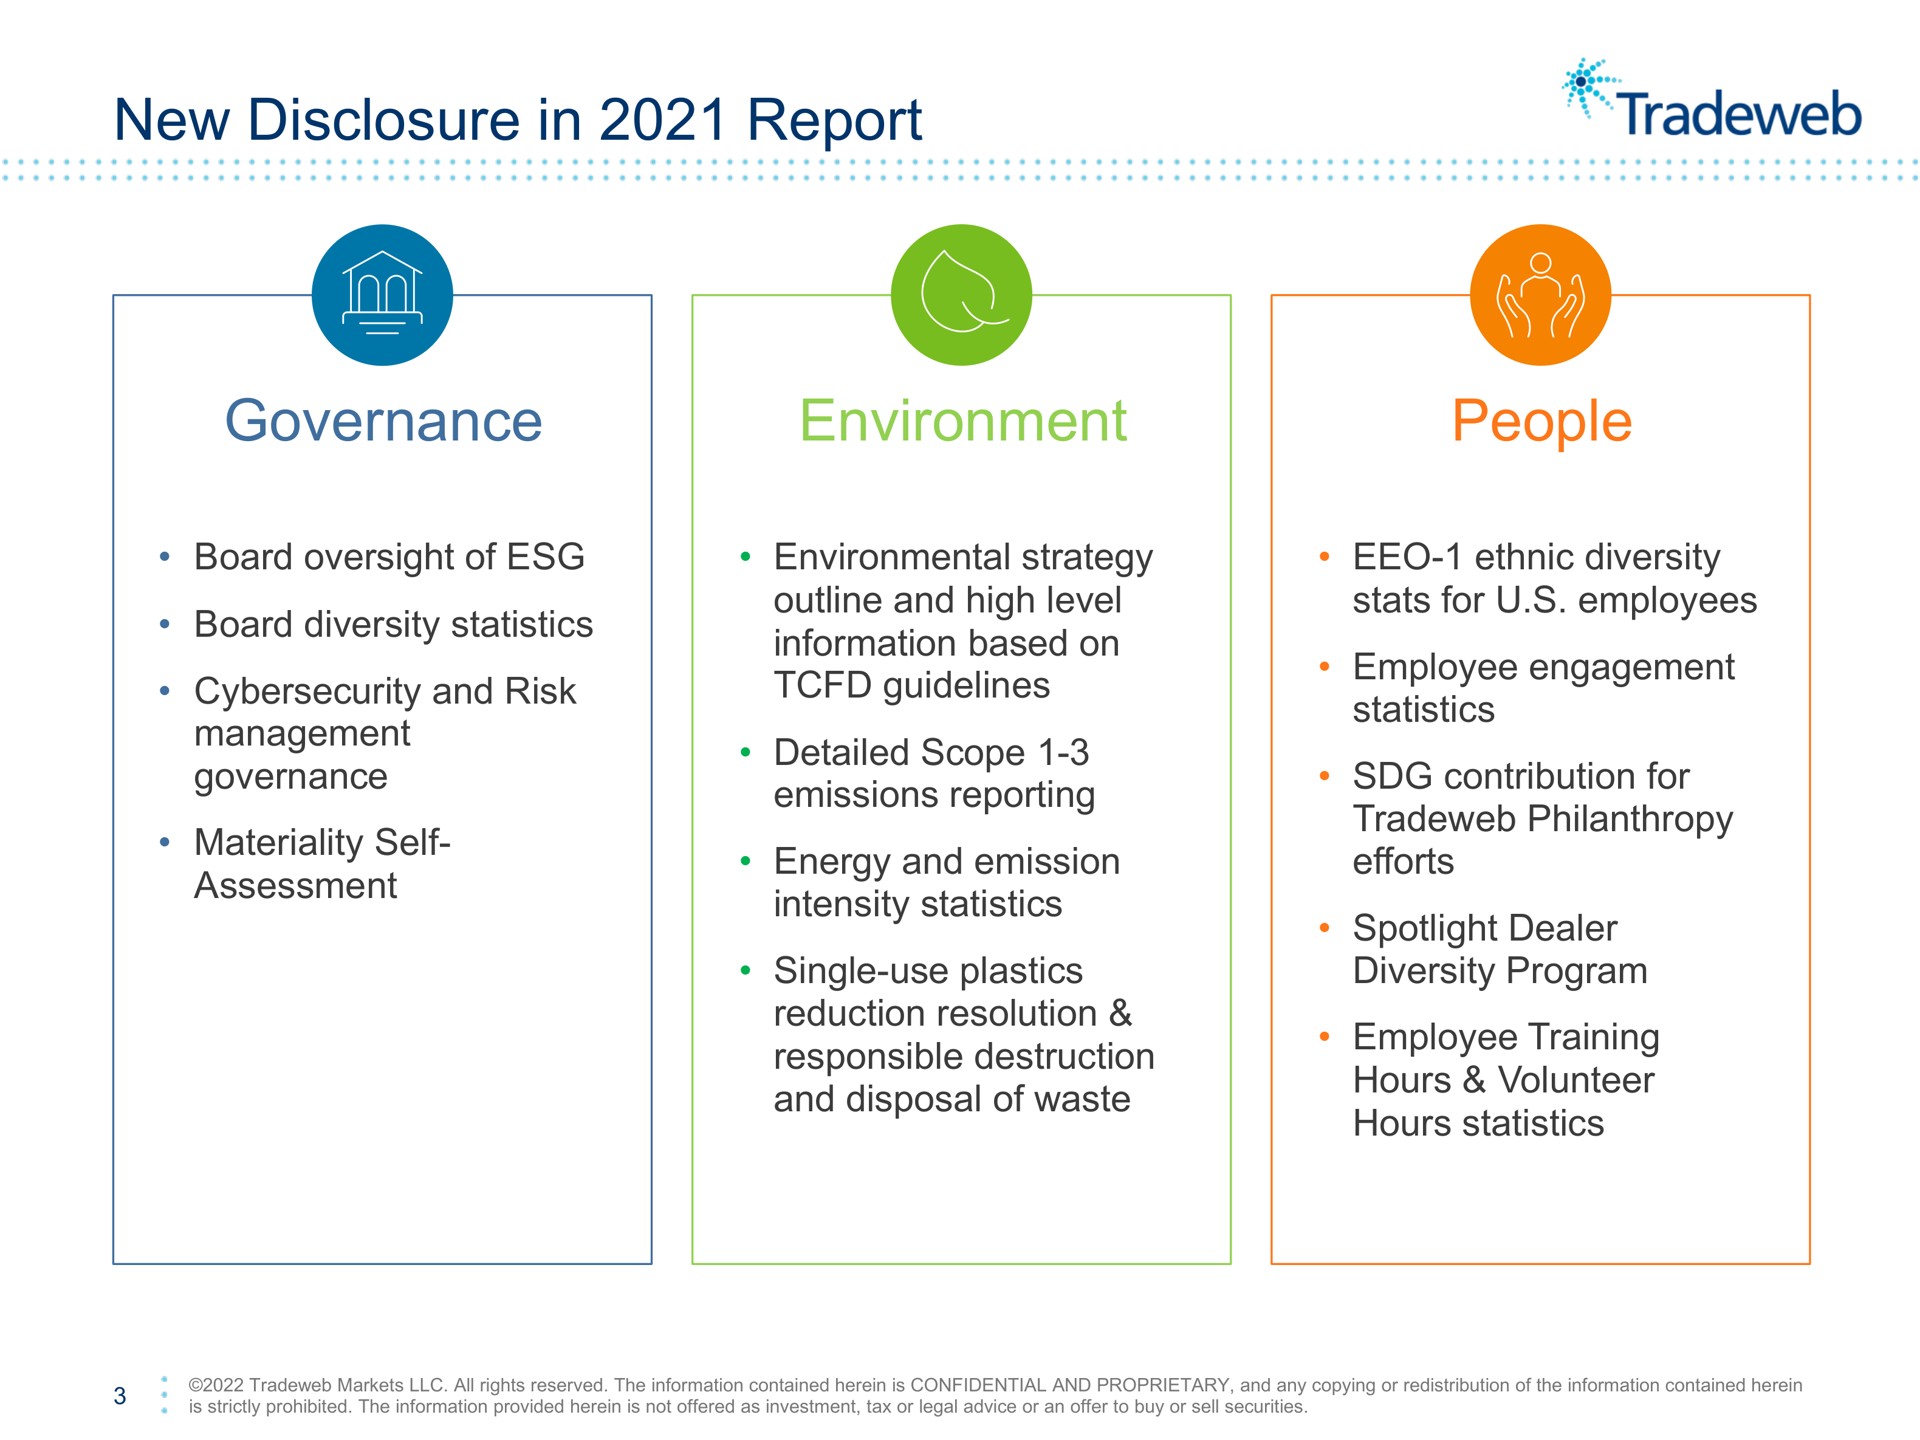 new disclosure in report governance environment people board oversight of board diversity statistics and risk management governance materiality self assessment environmental strategy outline and high level information based on guidelines detailed scope emissions reporting energy and emission intensity statistics single use plastics reduction resolution responsible destruction and disposal of waste ethnic diversity for employees employee engagement statistics contribution for philanthropy efforts spotlight dealer diversity program employee training hours volunteer hours statistics | Tradeweb